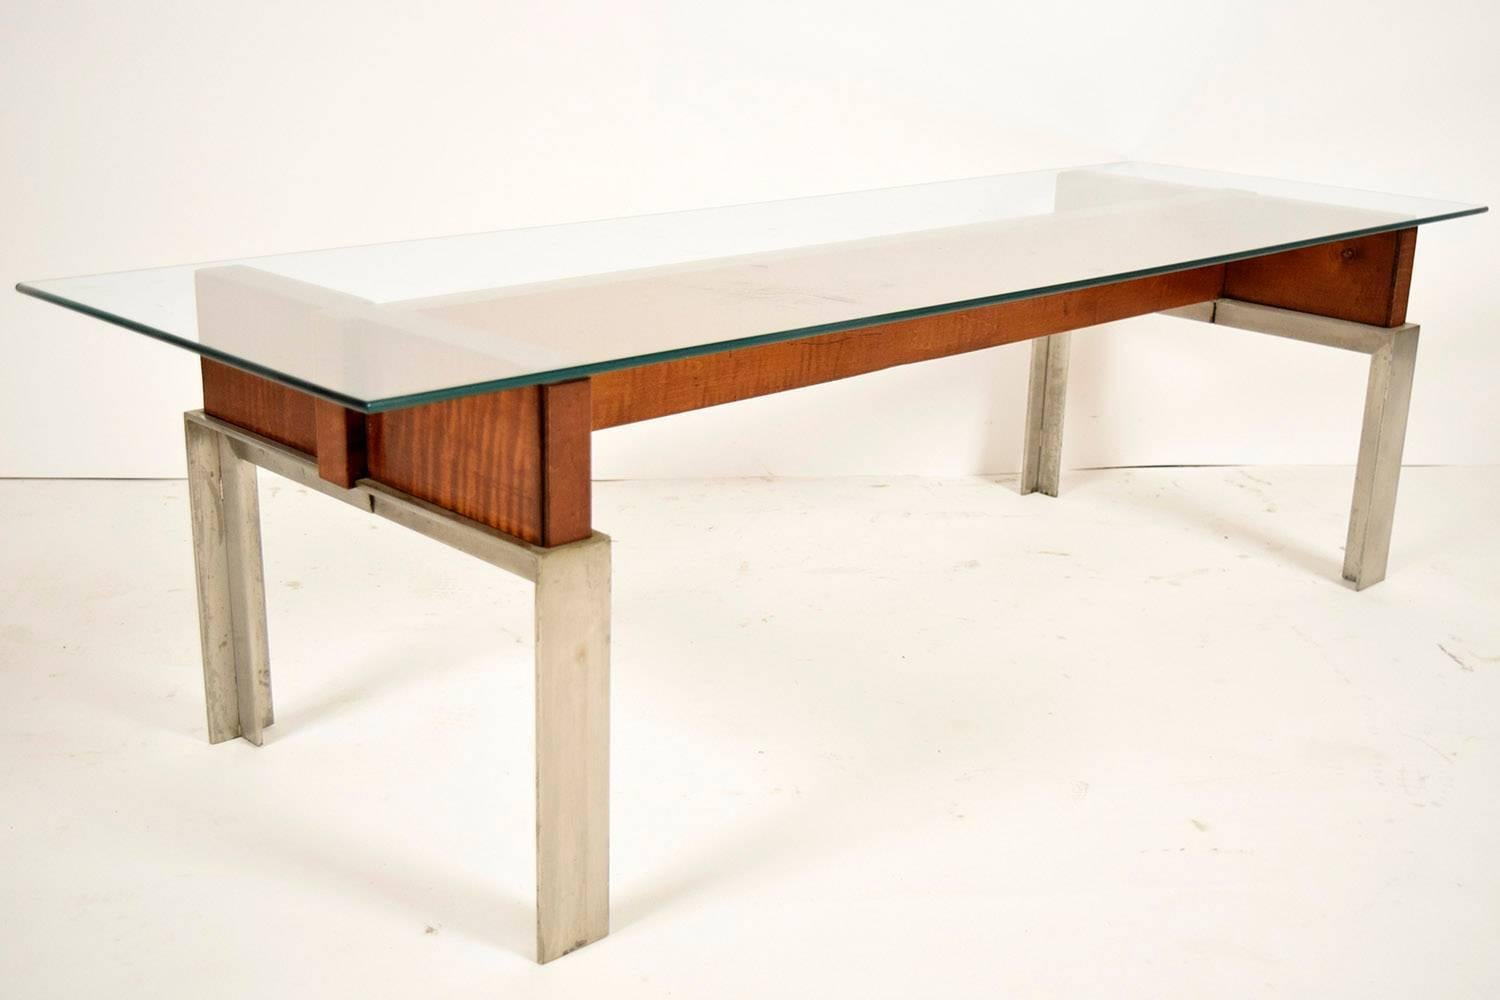 This is a beautiful 1970's Mid-Century Modern-style coffee table that will be a great addition to any room. The table has a clear glass top with a pencil polish and rests upon an H-shaped wooden frame. The gorgeous wood is complemented by four